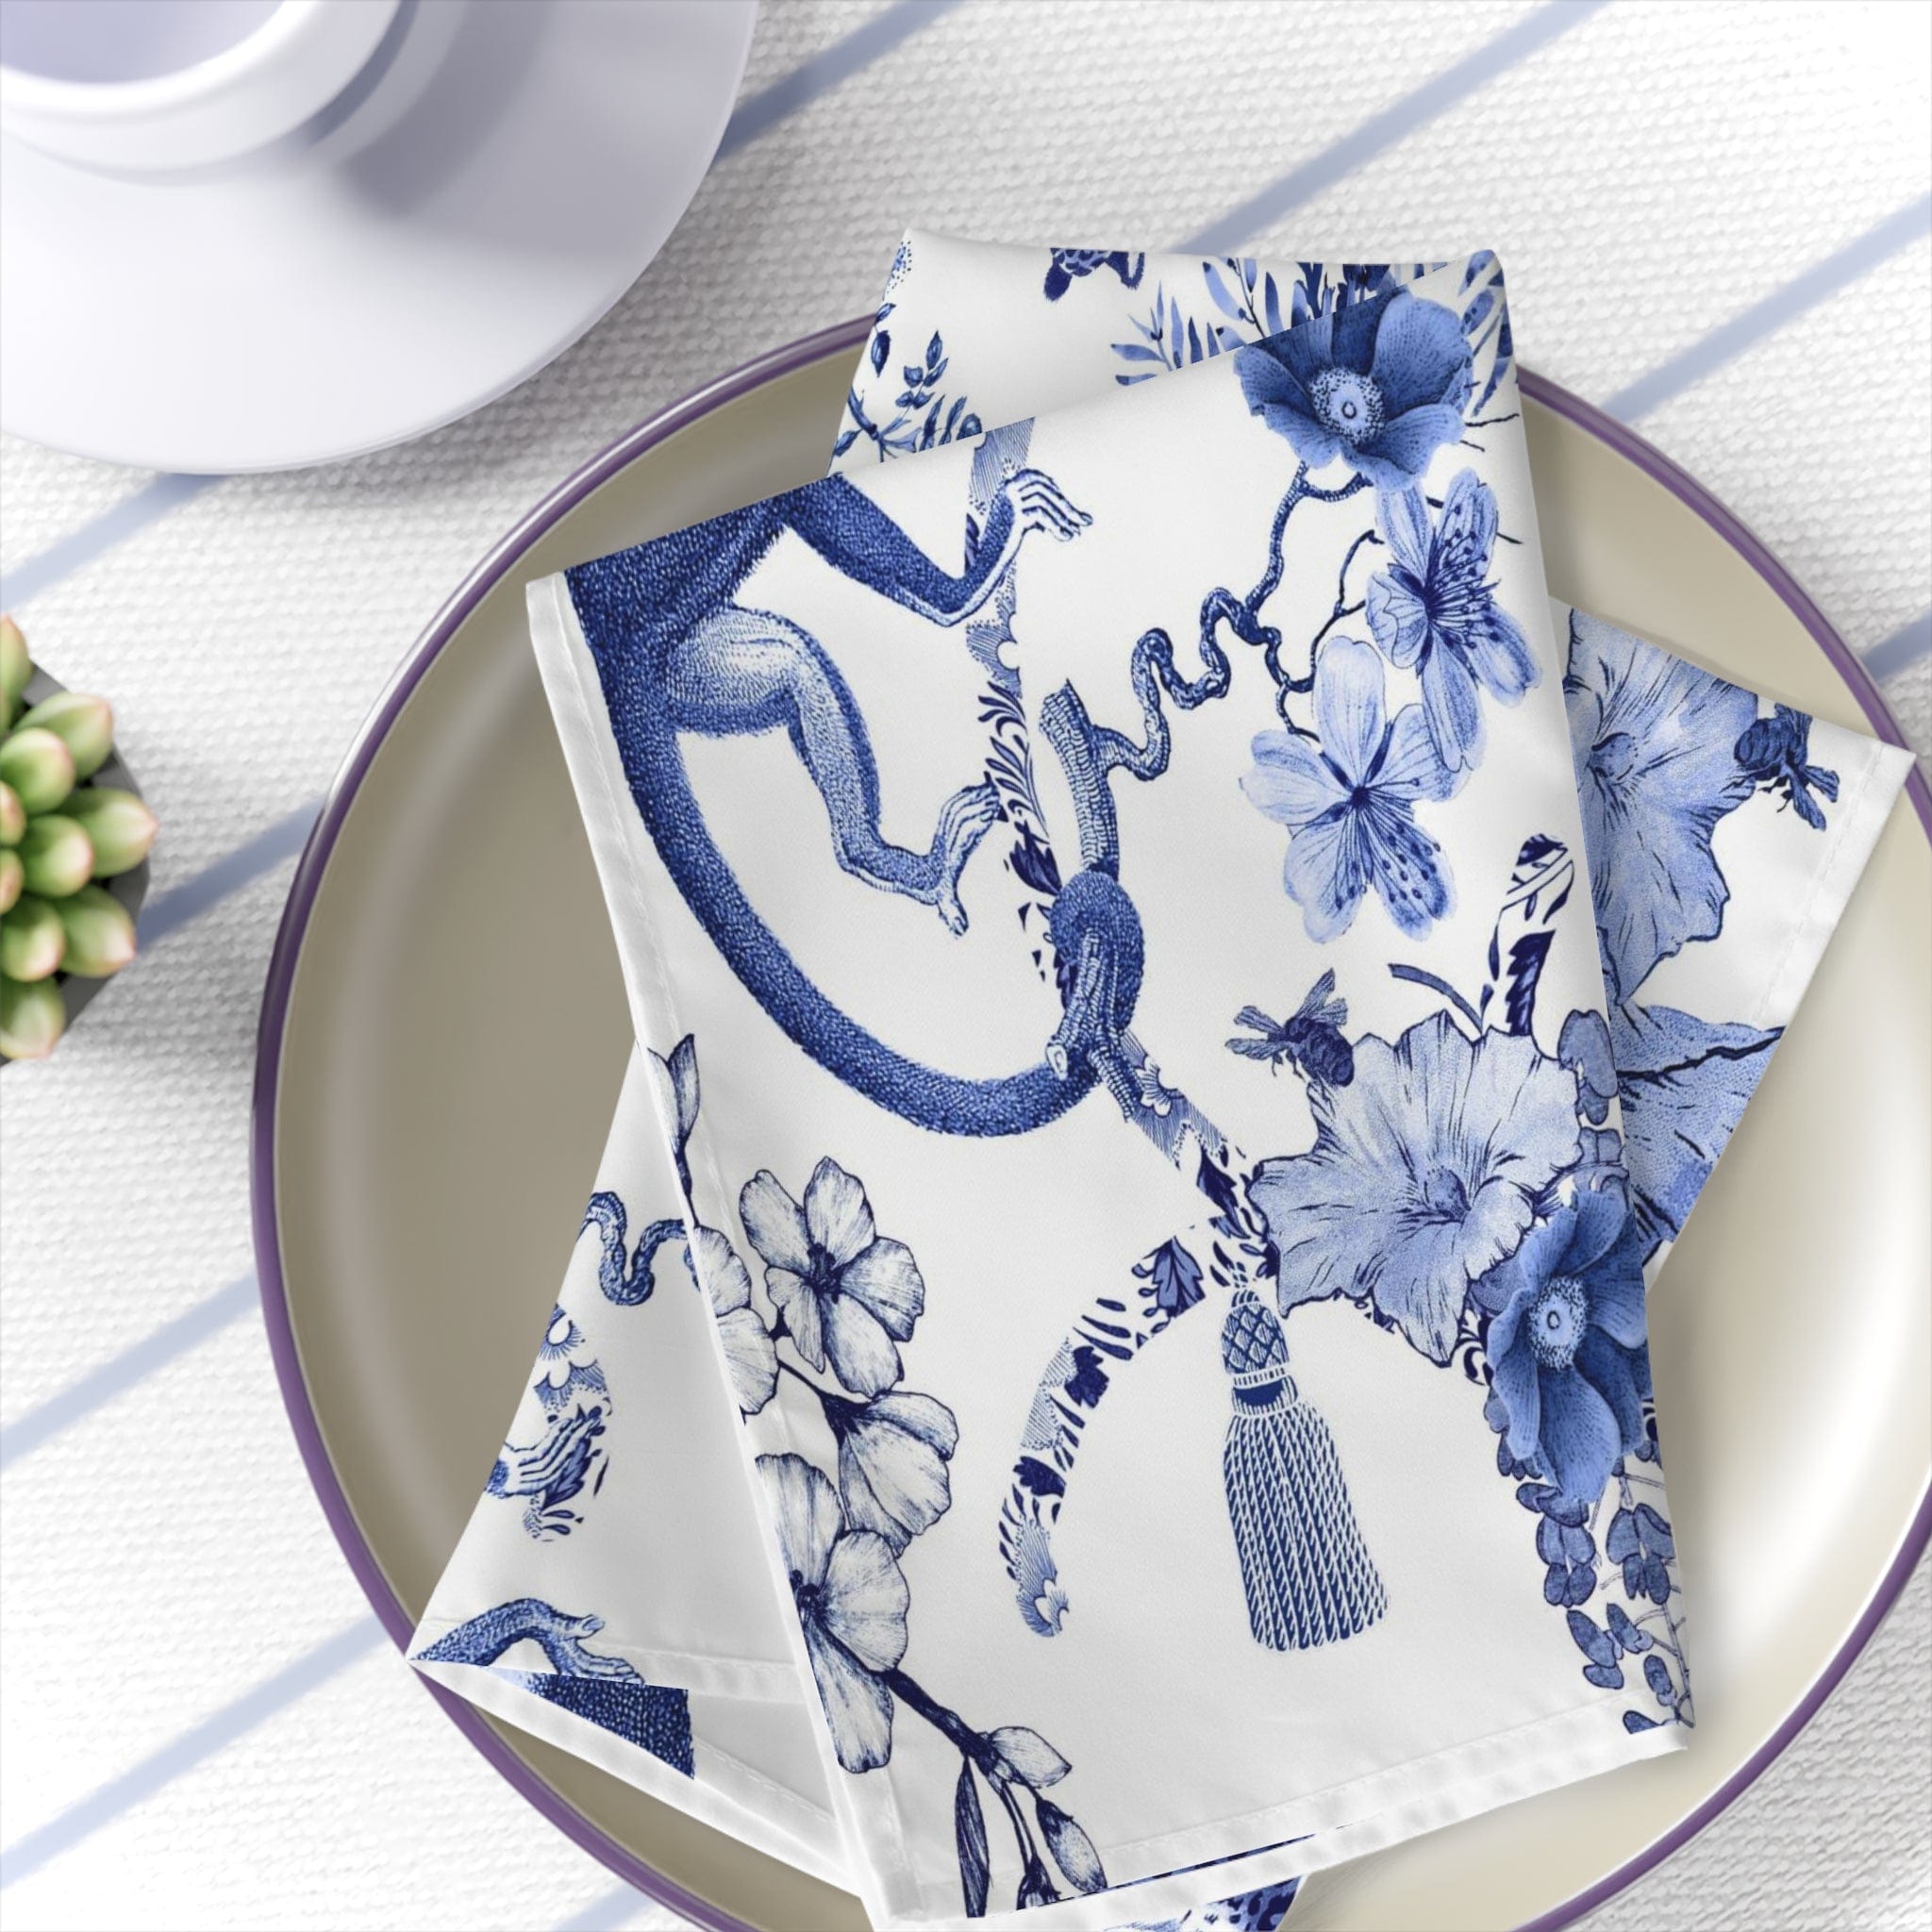 Printify Chinoiserie Botanical Toile Napkins Set of 4, Floral Blue and White Chinoiserie Jungle Table Linen, Country Farmhouse Decor Accessories 4-piece set / White / 19&quot; × 19&quot; 31591111042773290028